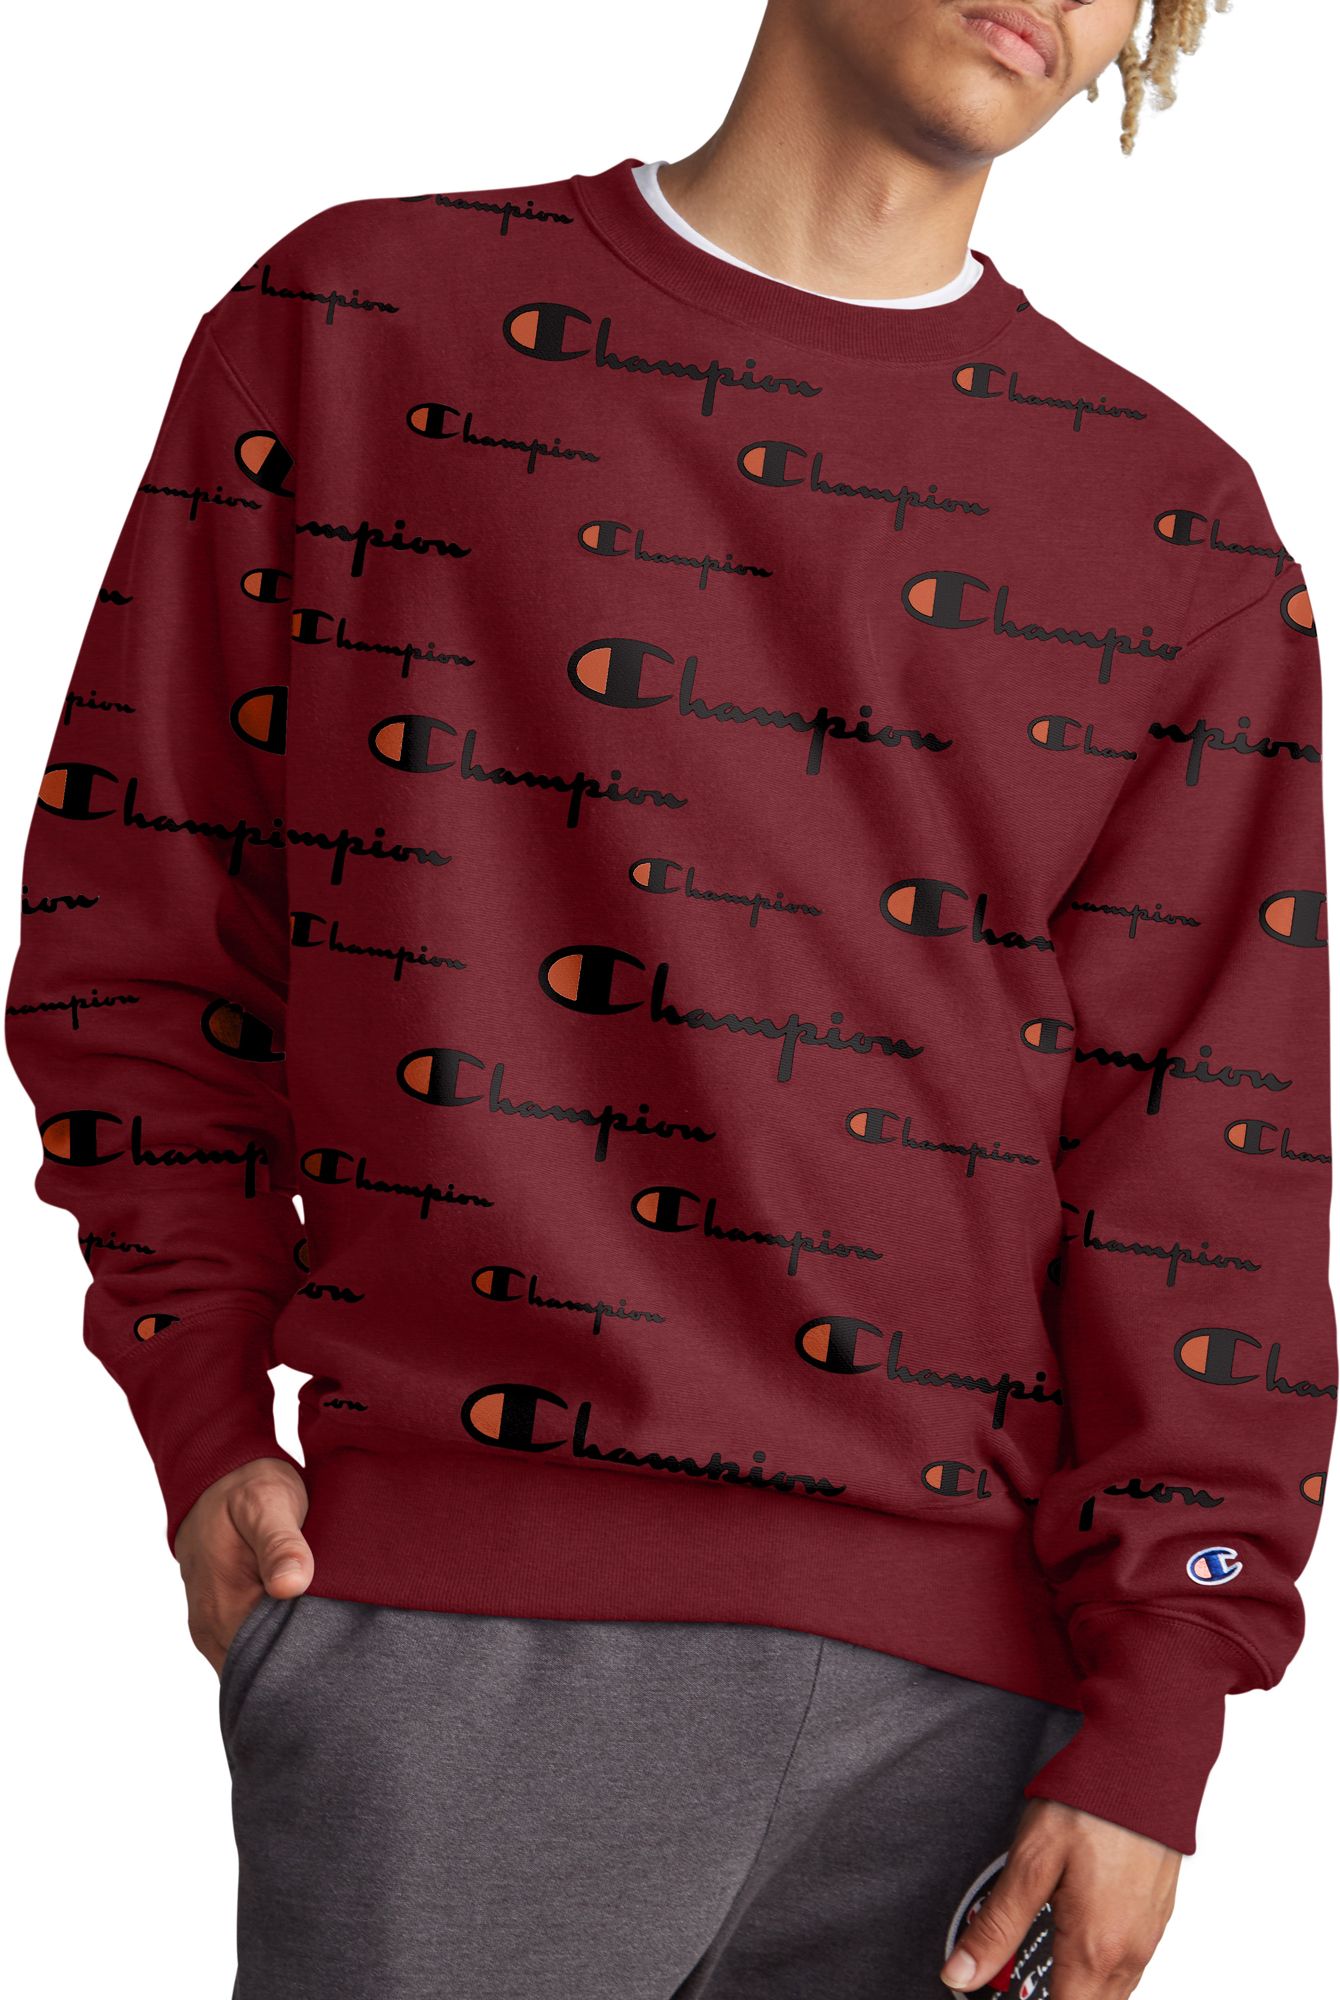 Champion Sweatshirt All Over Top Sellers, 60% OFF | www 